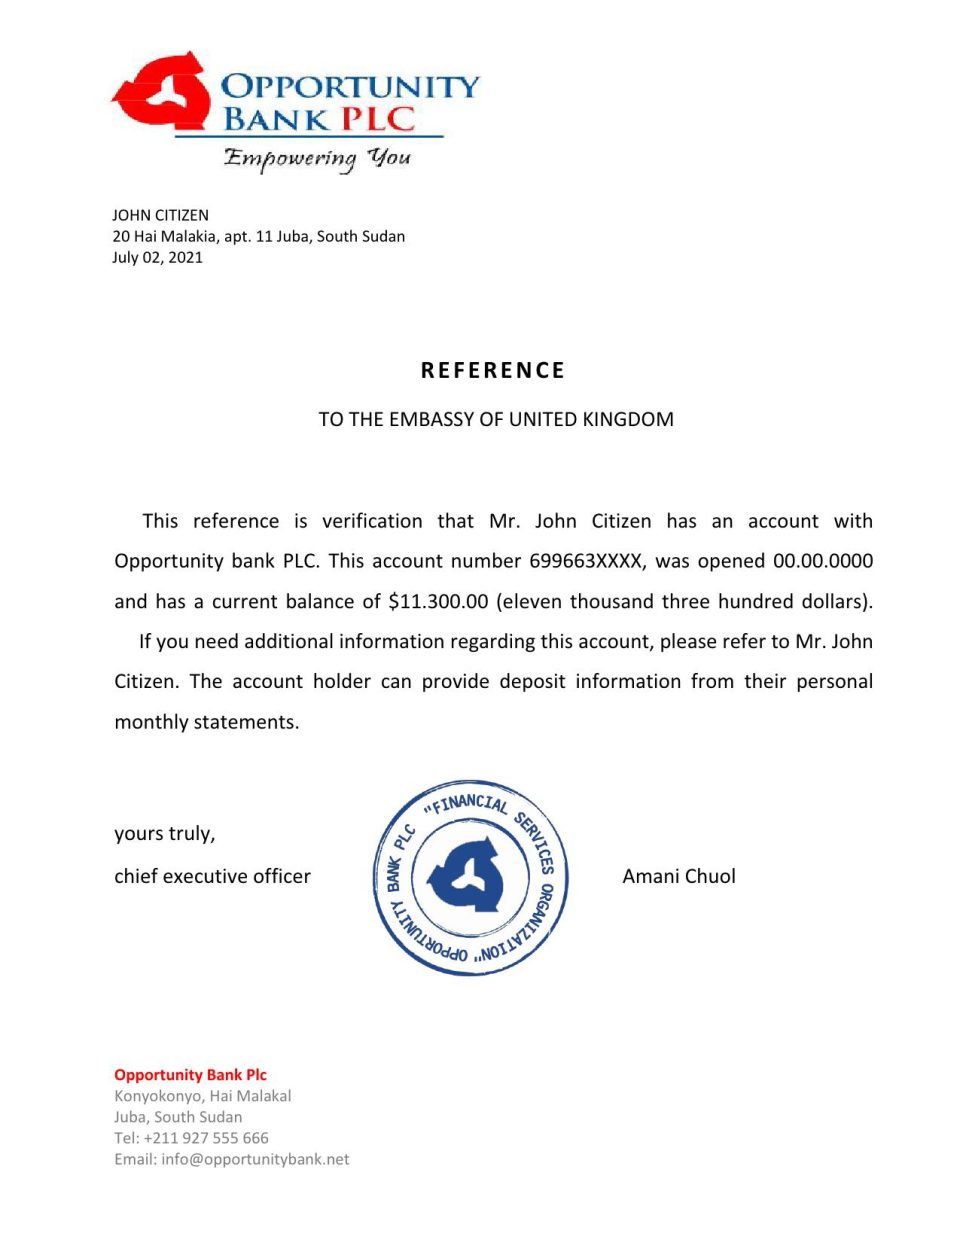 Download South Sudan Opportunity Bank Reference Letter Templates | Editable Word